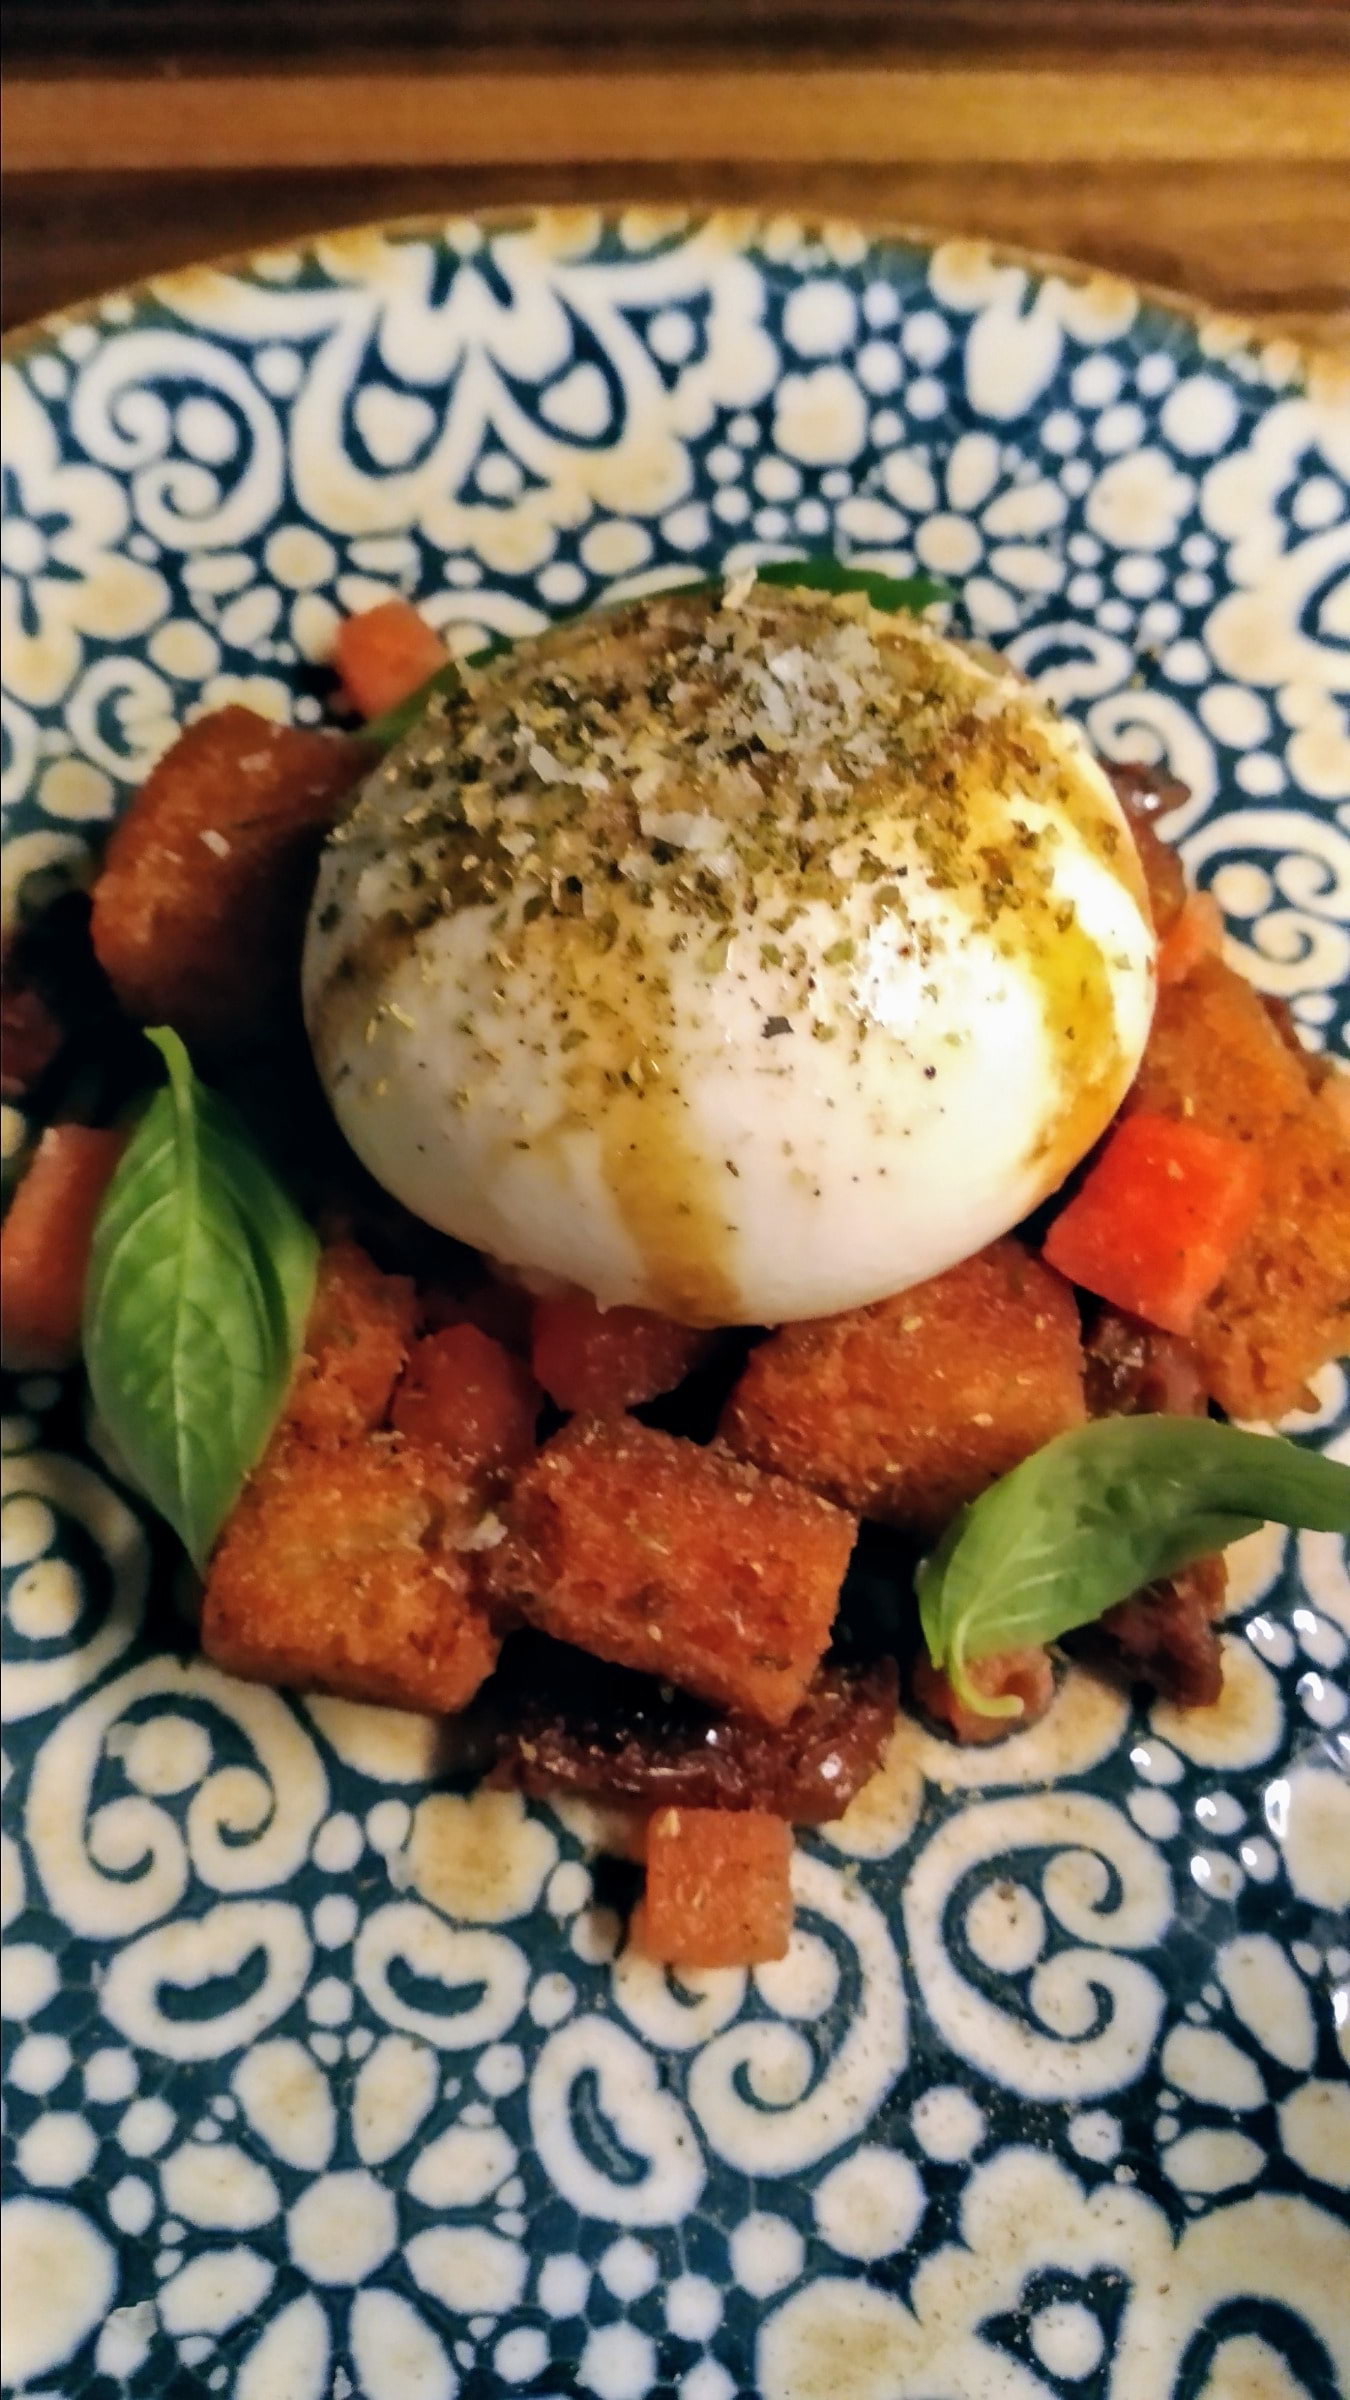 Burrata – Photo from Jacqueline's by Katarina D. (28/10/2020)